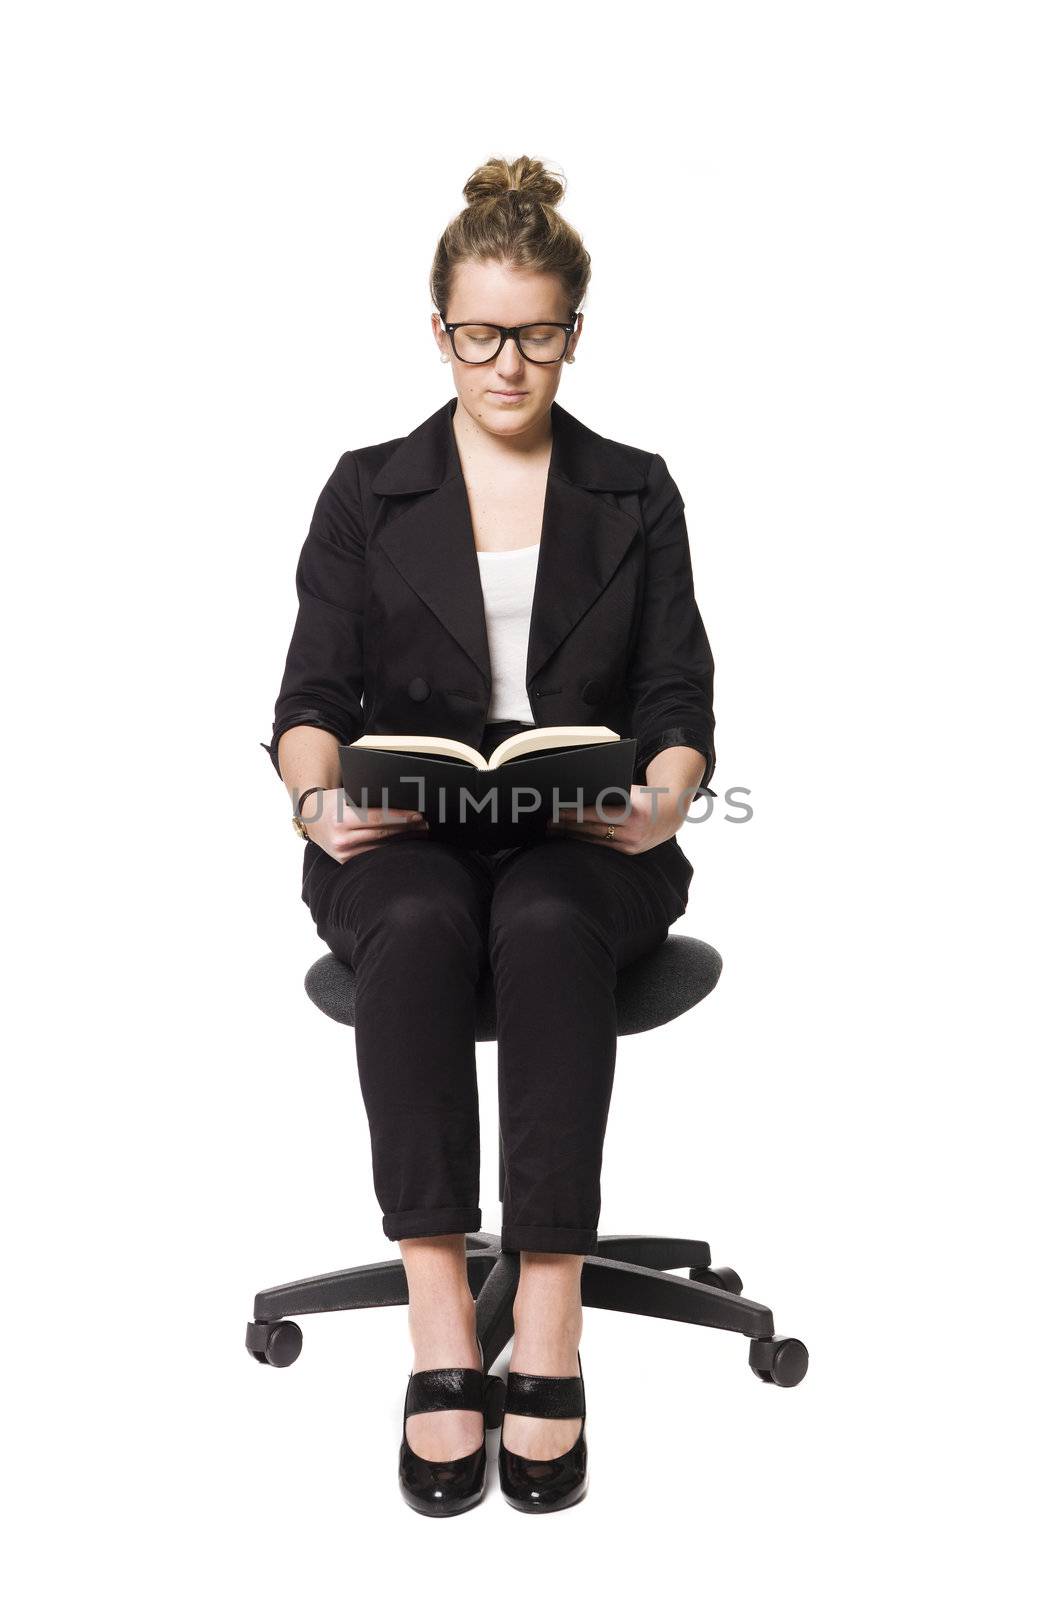 Buisnesswoman sitting on a chair with a book